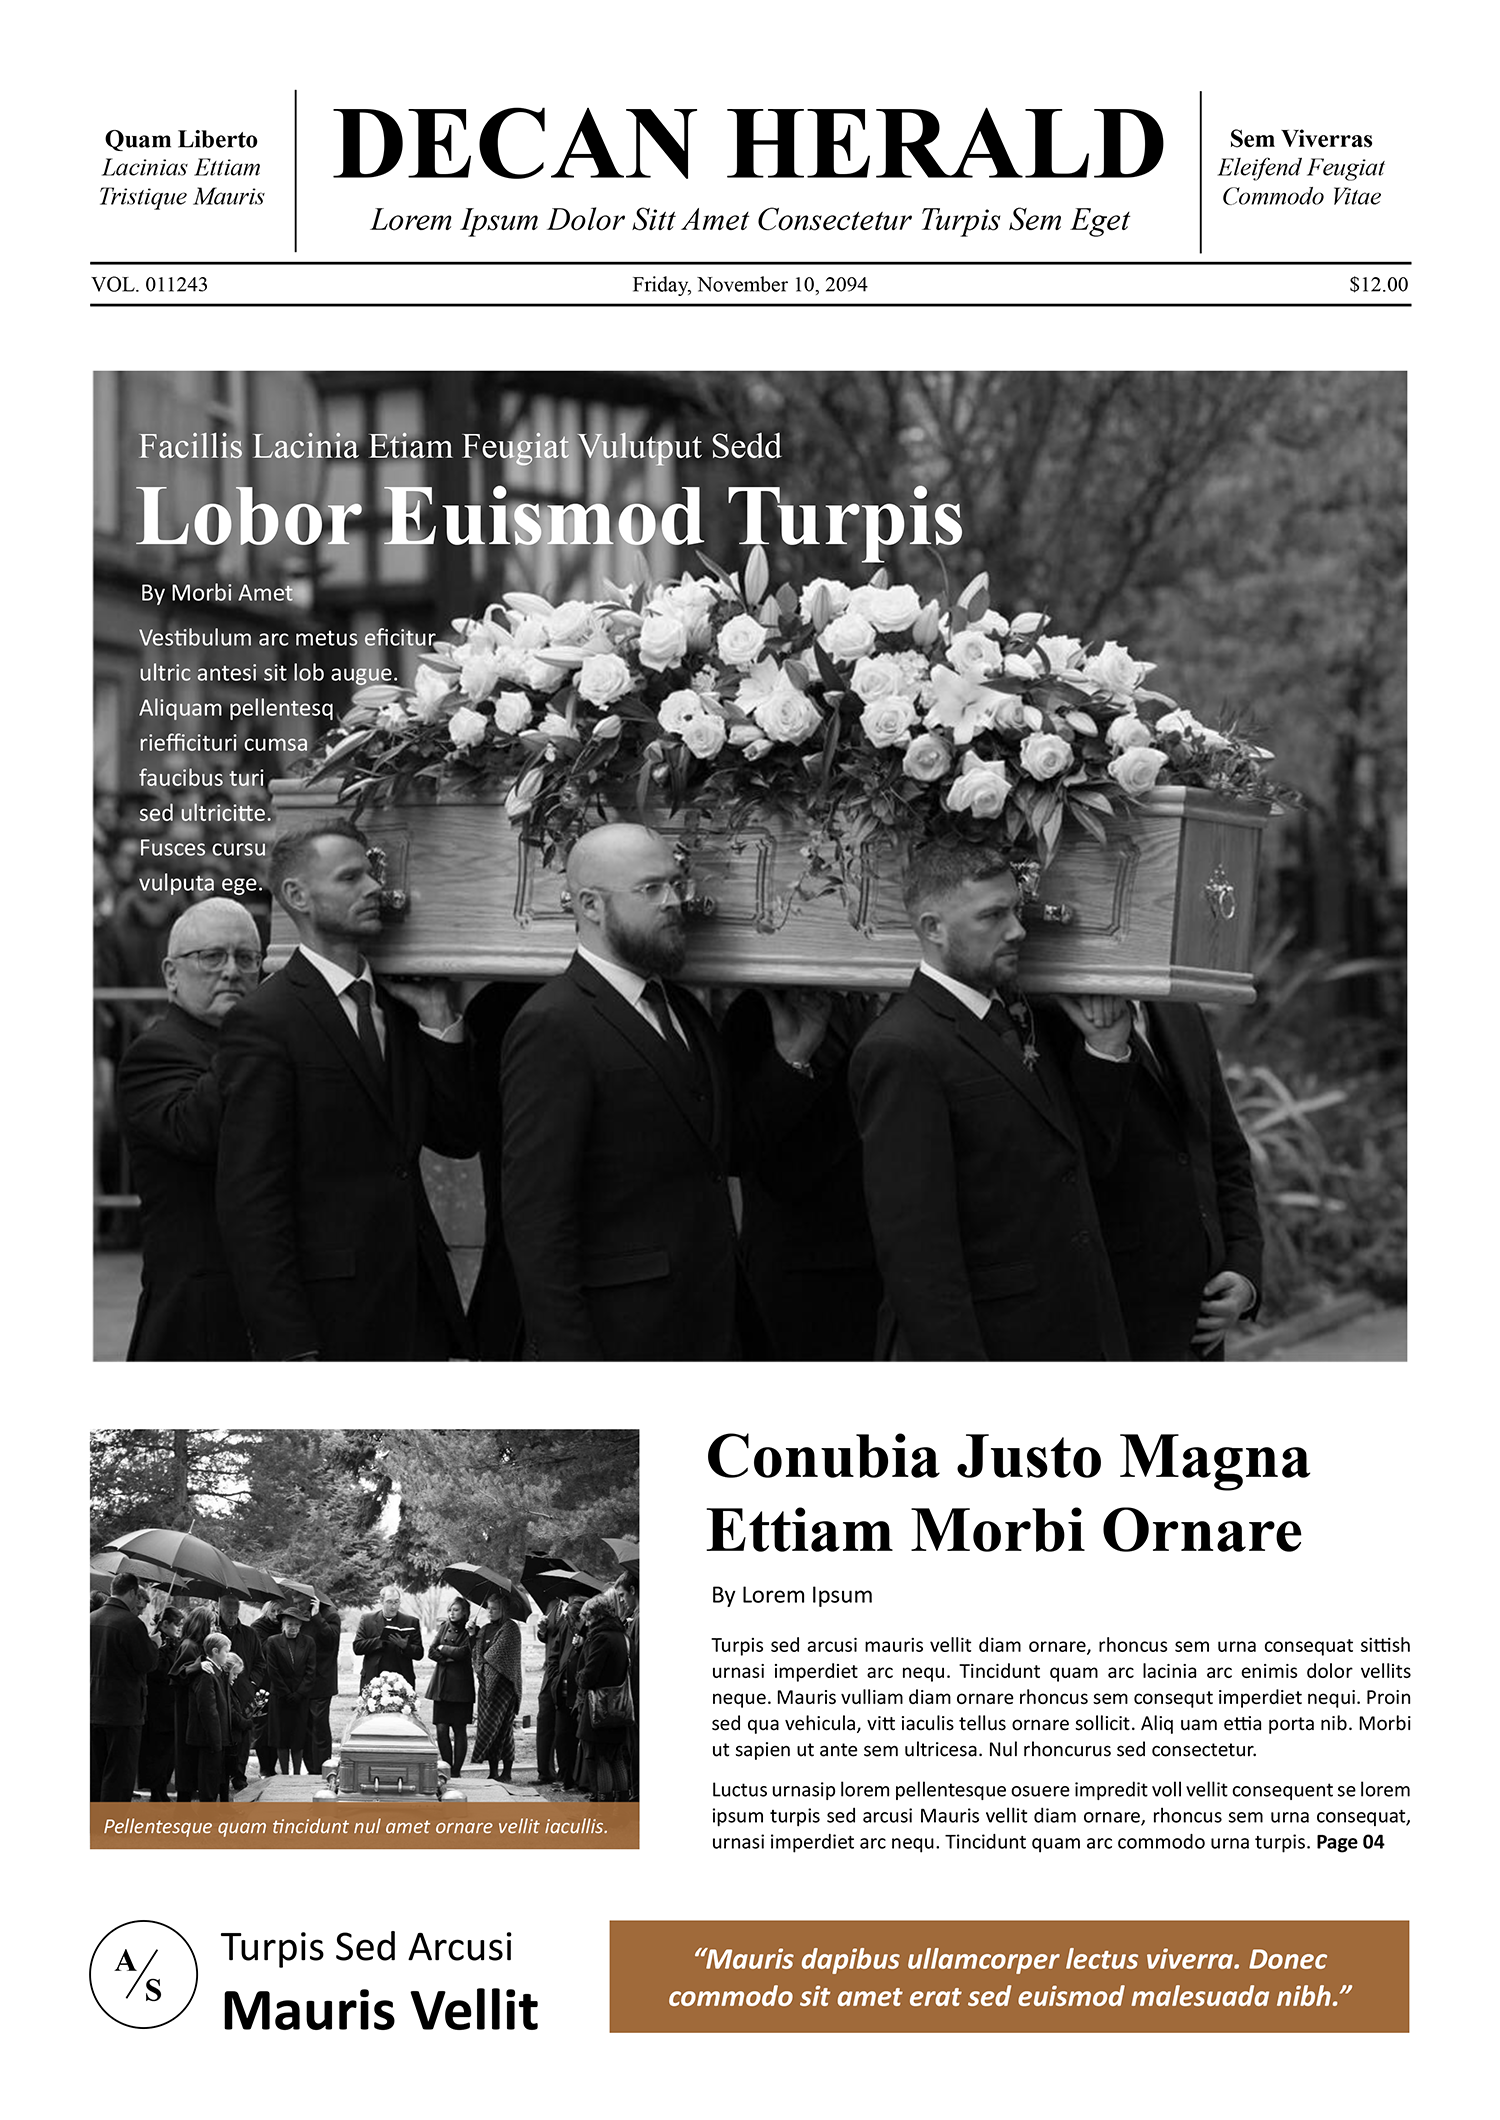 Obituary and Acknowledgemnt Newspaper Template - Page 01